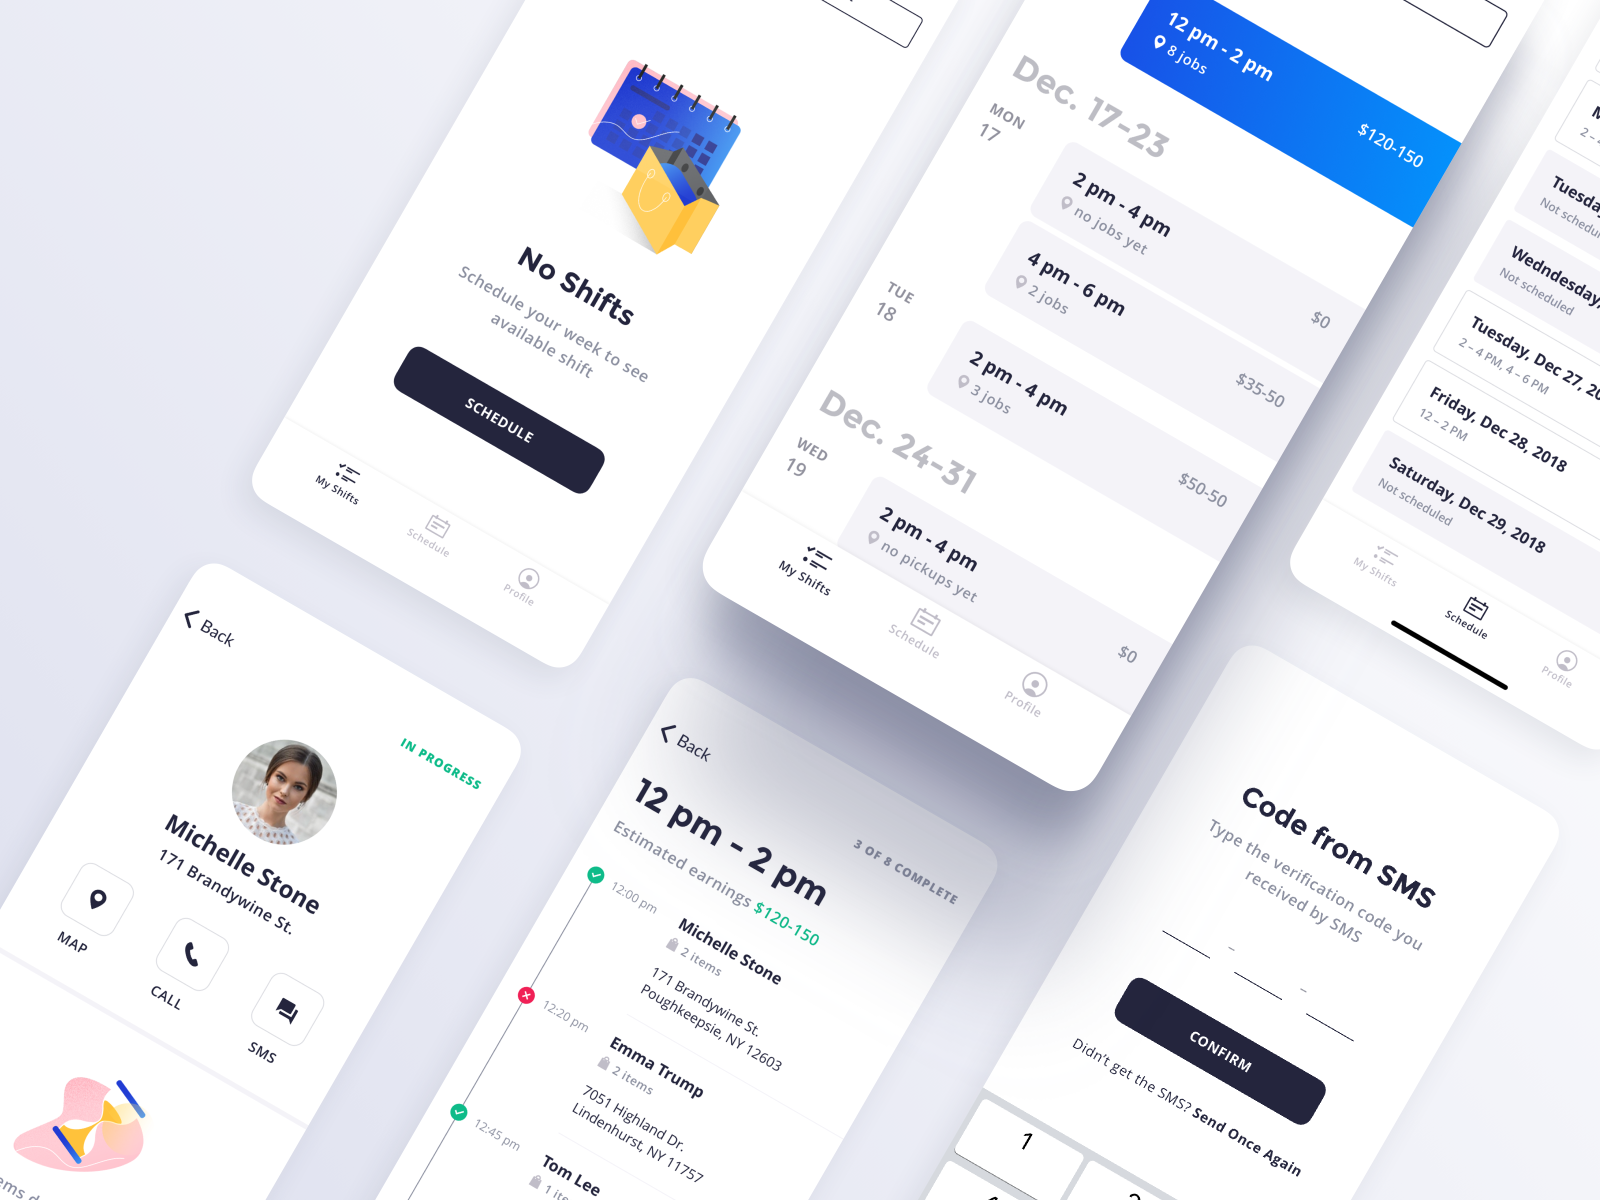 Courier App of Everwear by Dmytro Honcharov on Dribbble